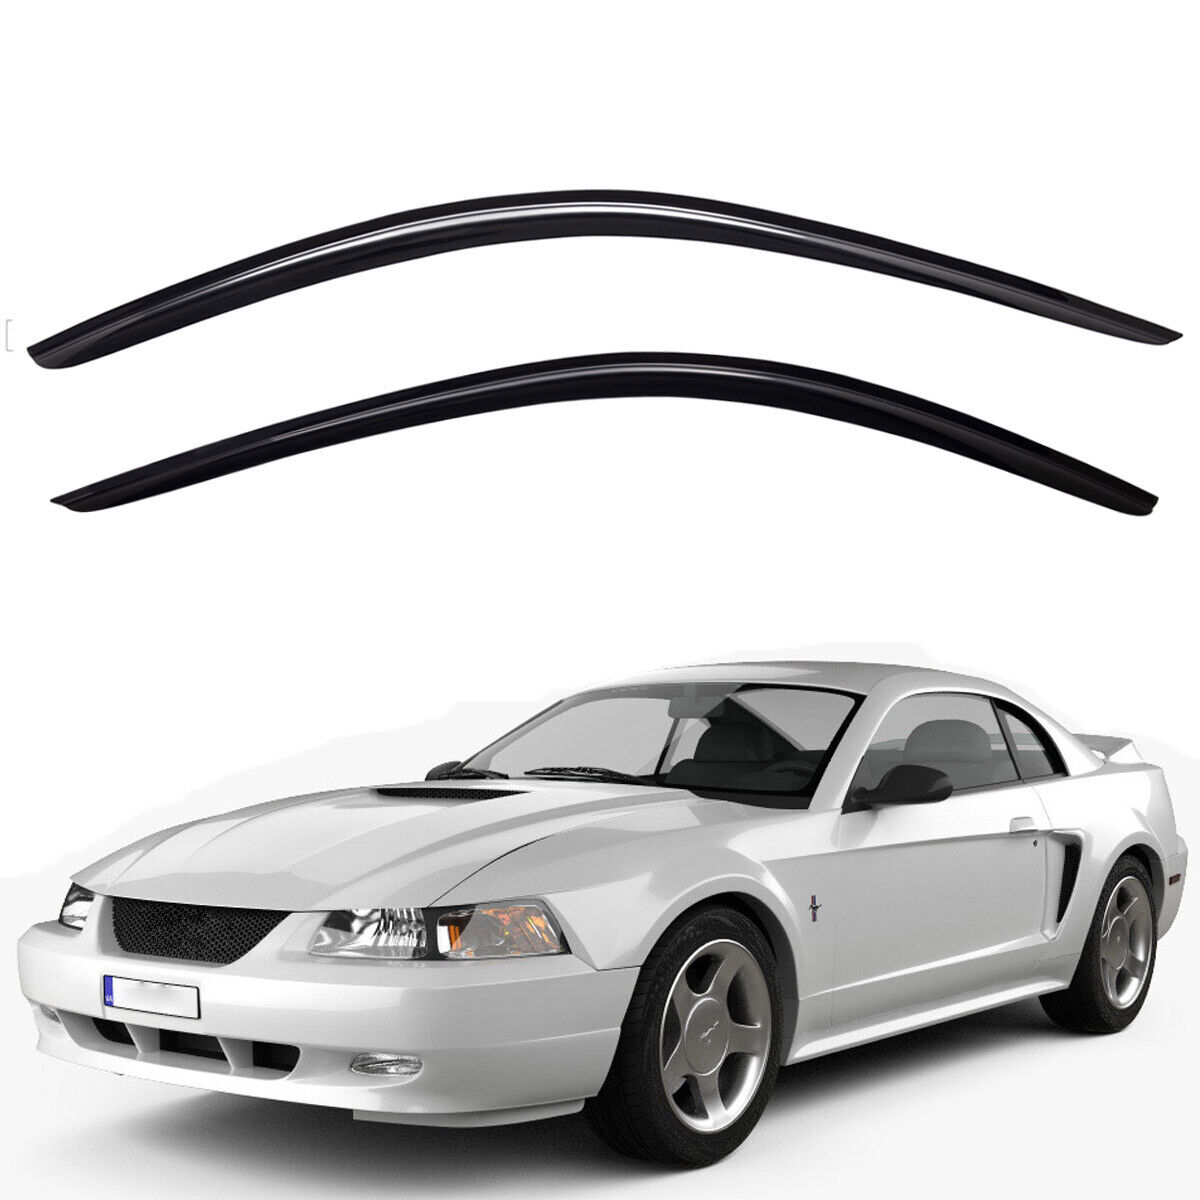 Fits 1994-2004 Ford Mustang Coupe Tape-on Window Visors Rain Guards Deflectors 